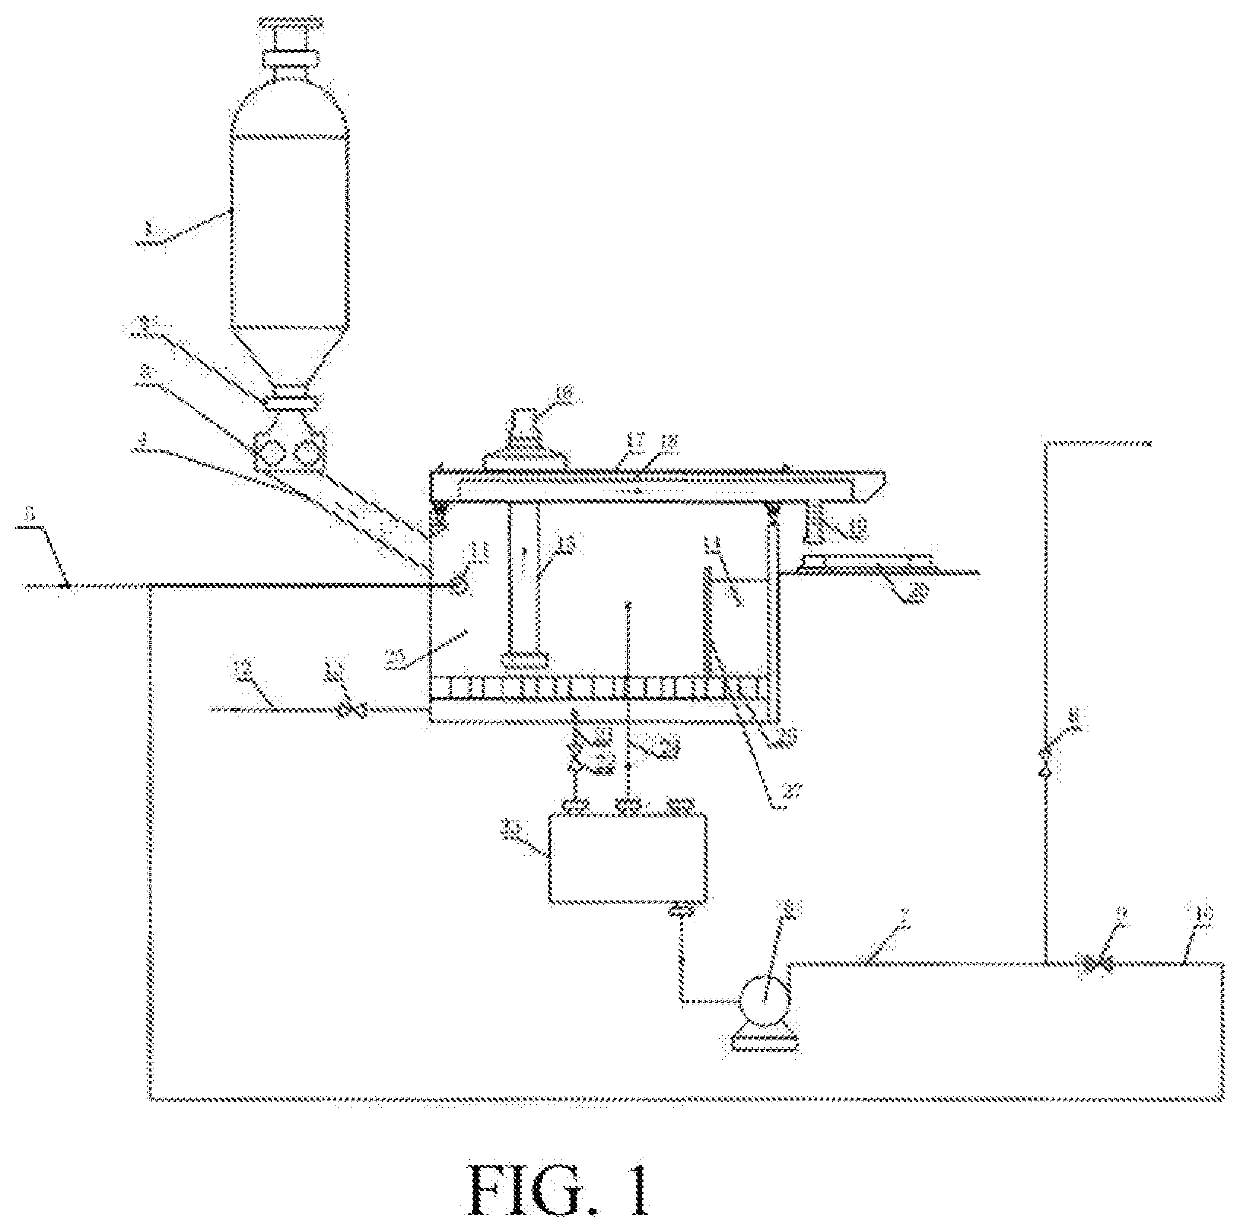 Automatic dehydration, extraction and transportation apparatus for petroleum coke